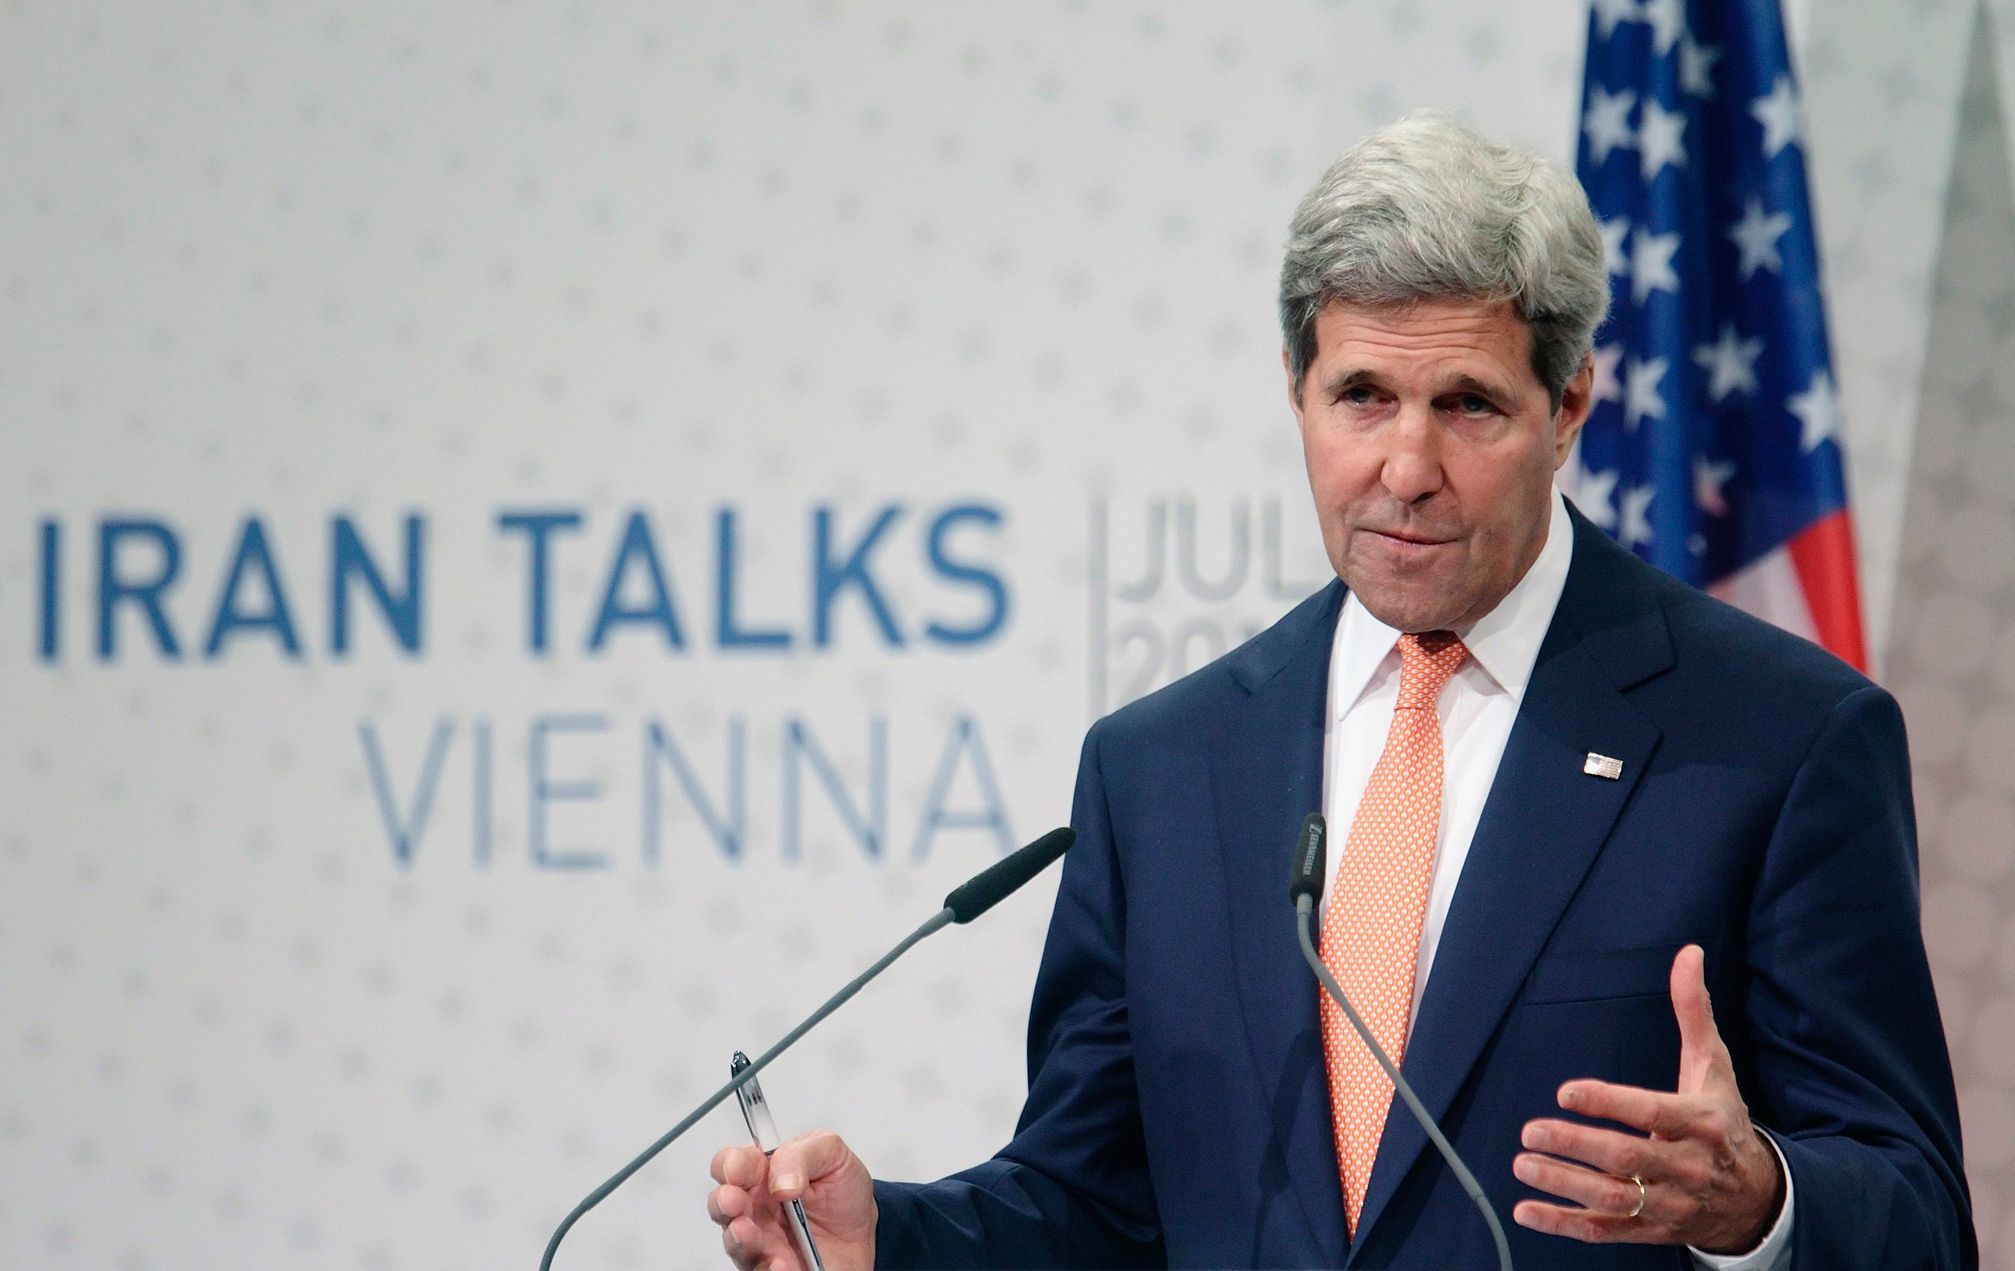 U.S. Secretary of State John Kerry speaks during a news conference in Vienna